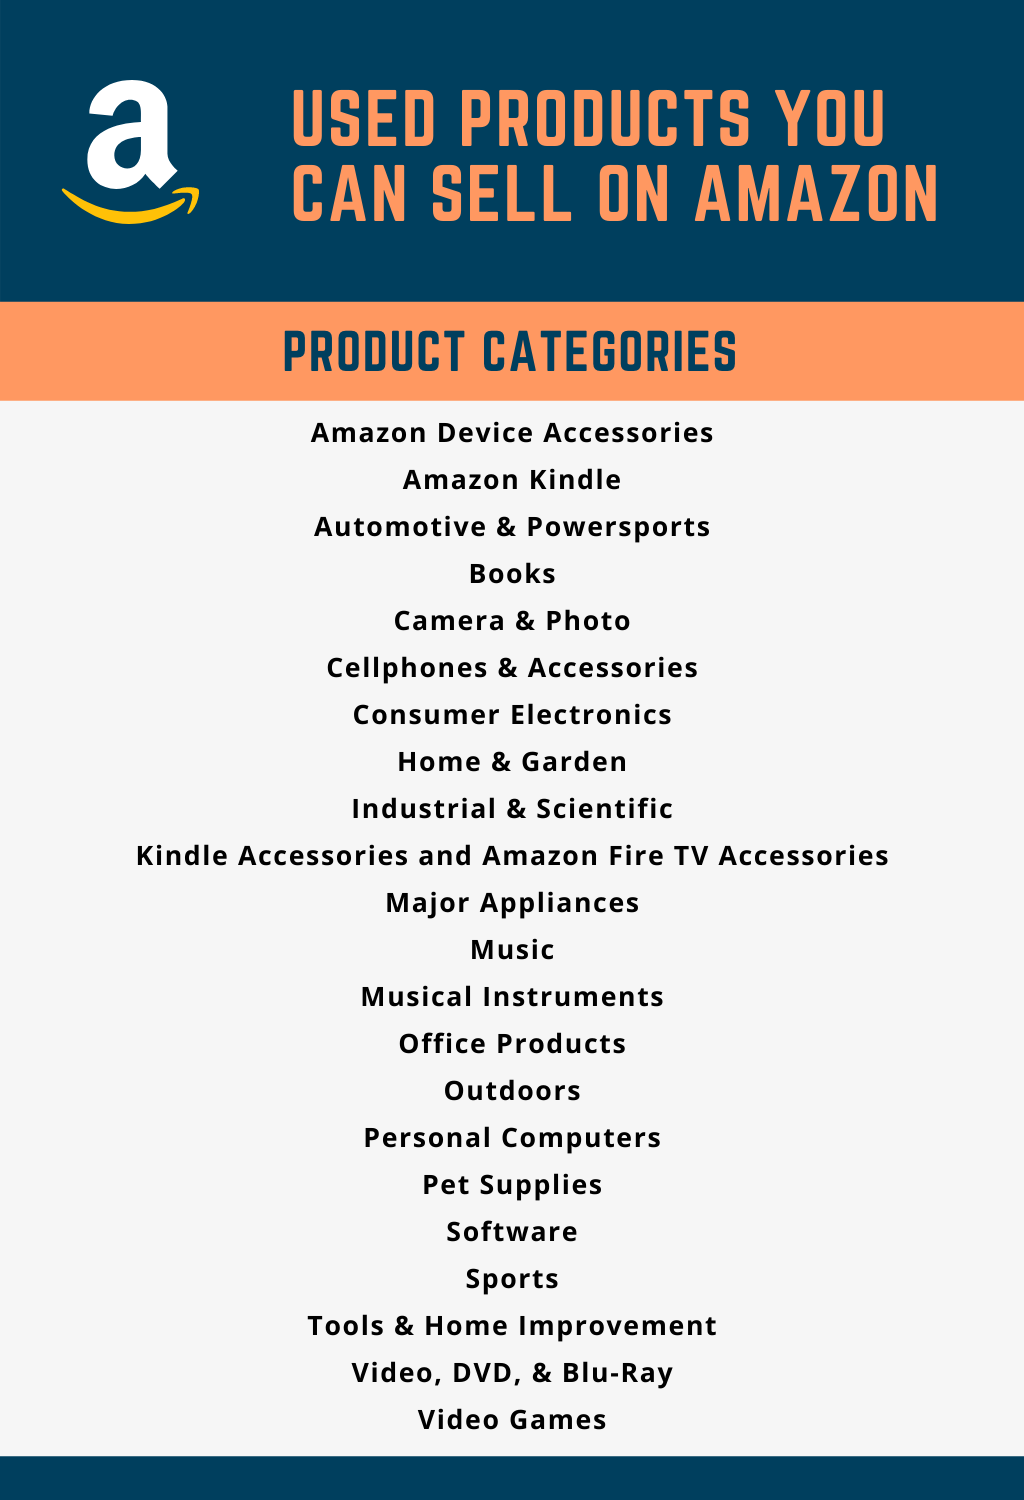 a-guide-to-selling-used-items-on-amazon-capforge